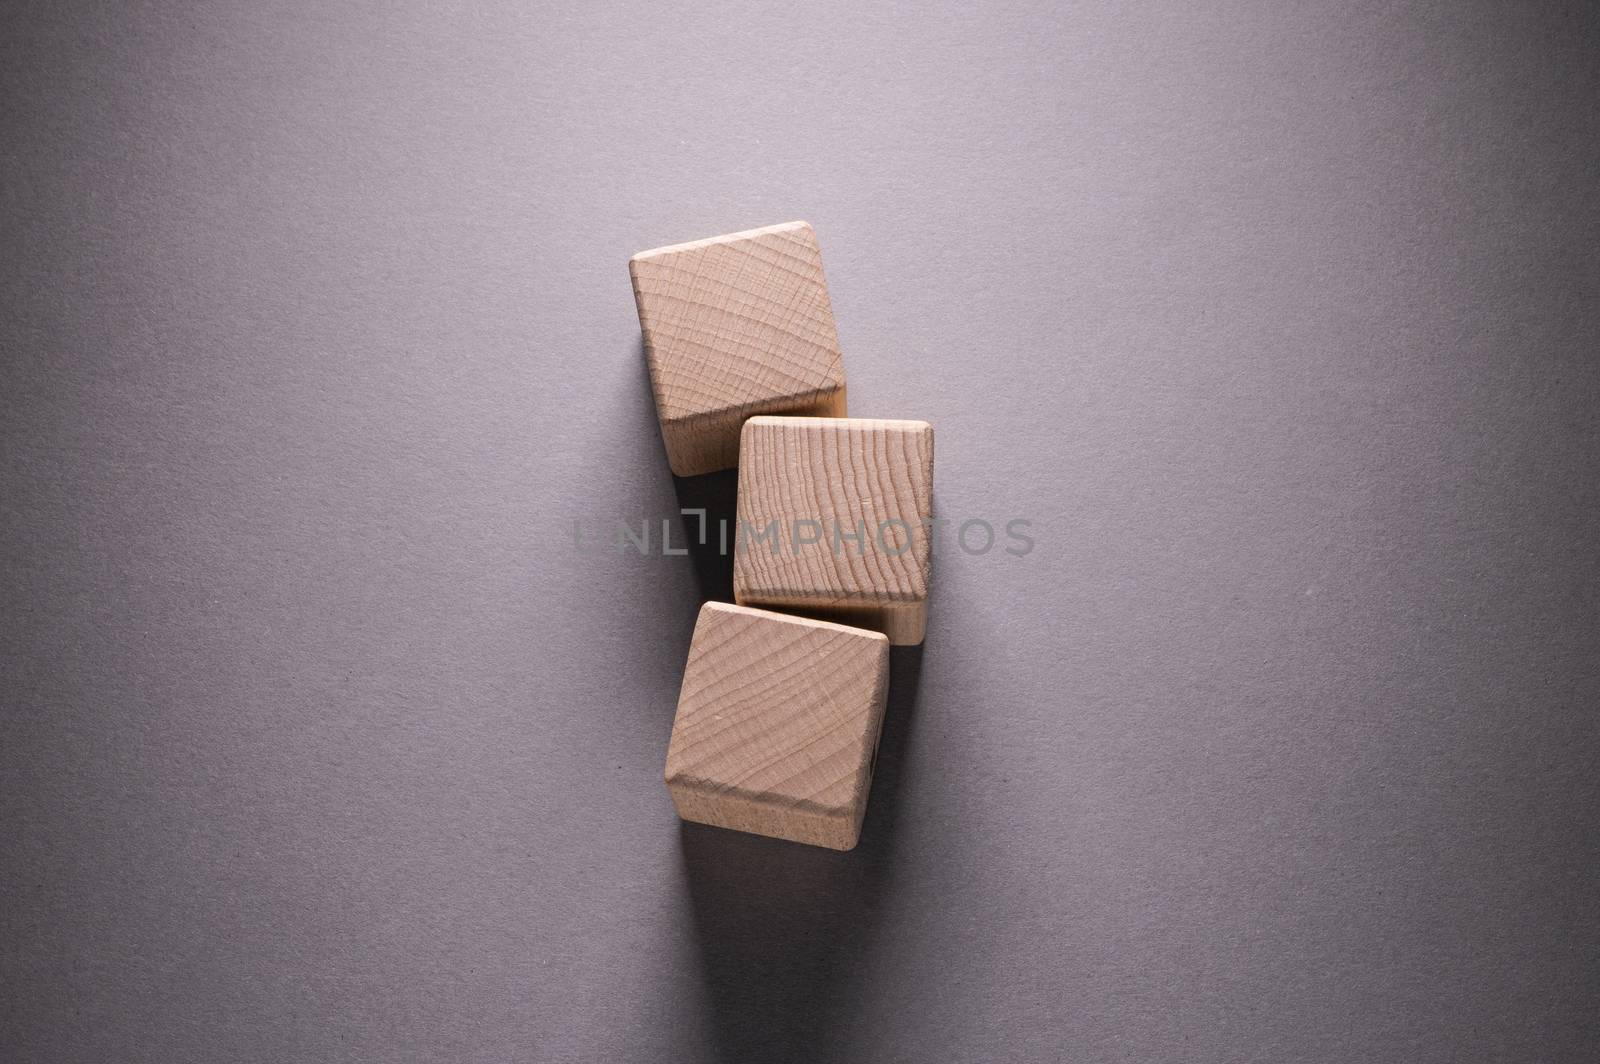 Wooden Geometric Shapes Cube on a paper background , This can use for past your words